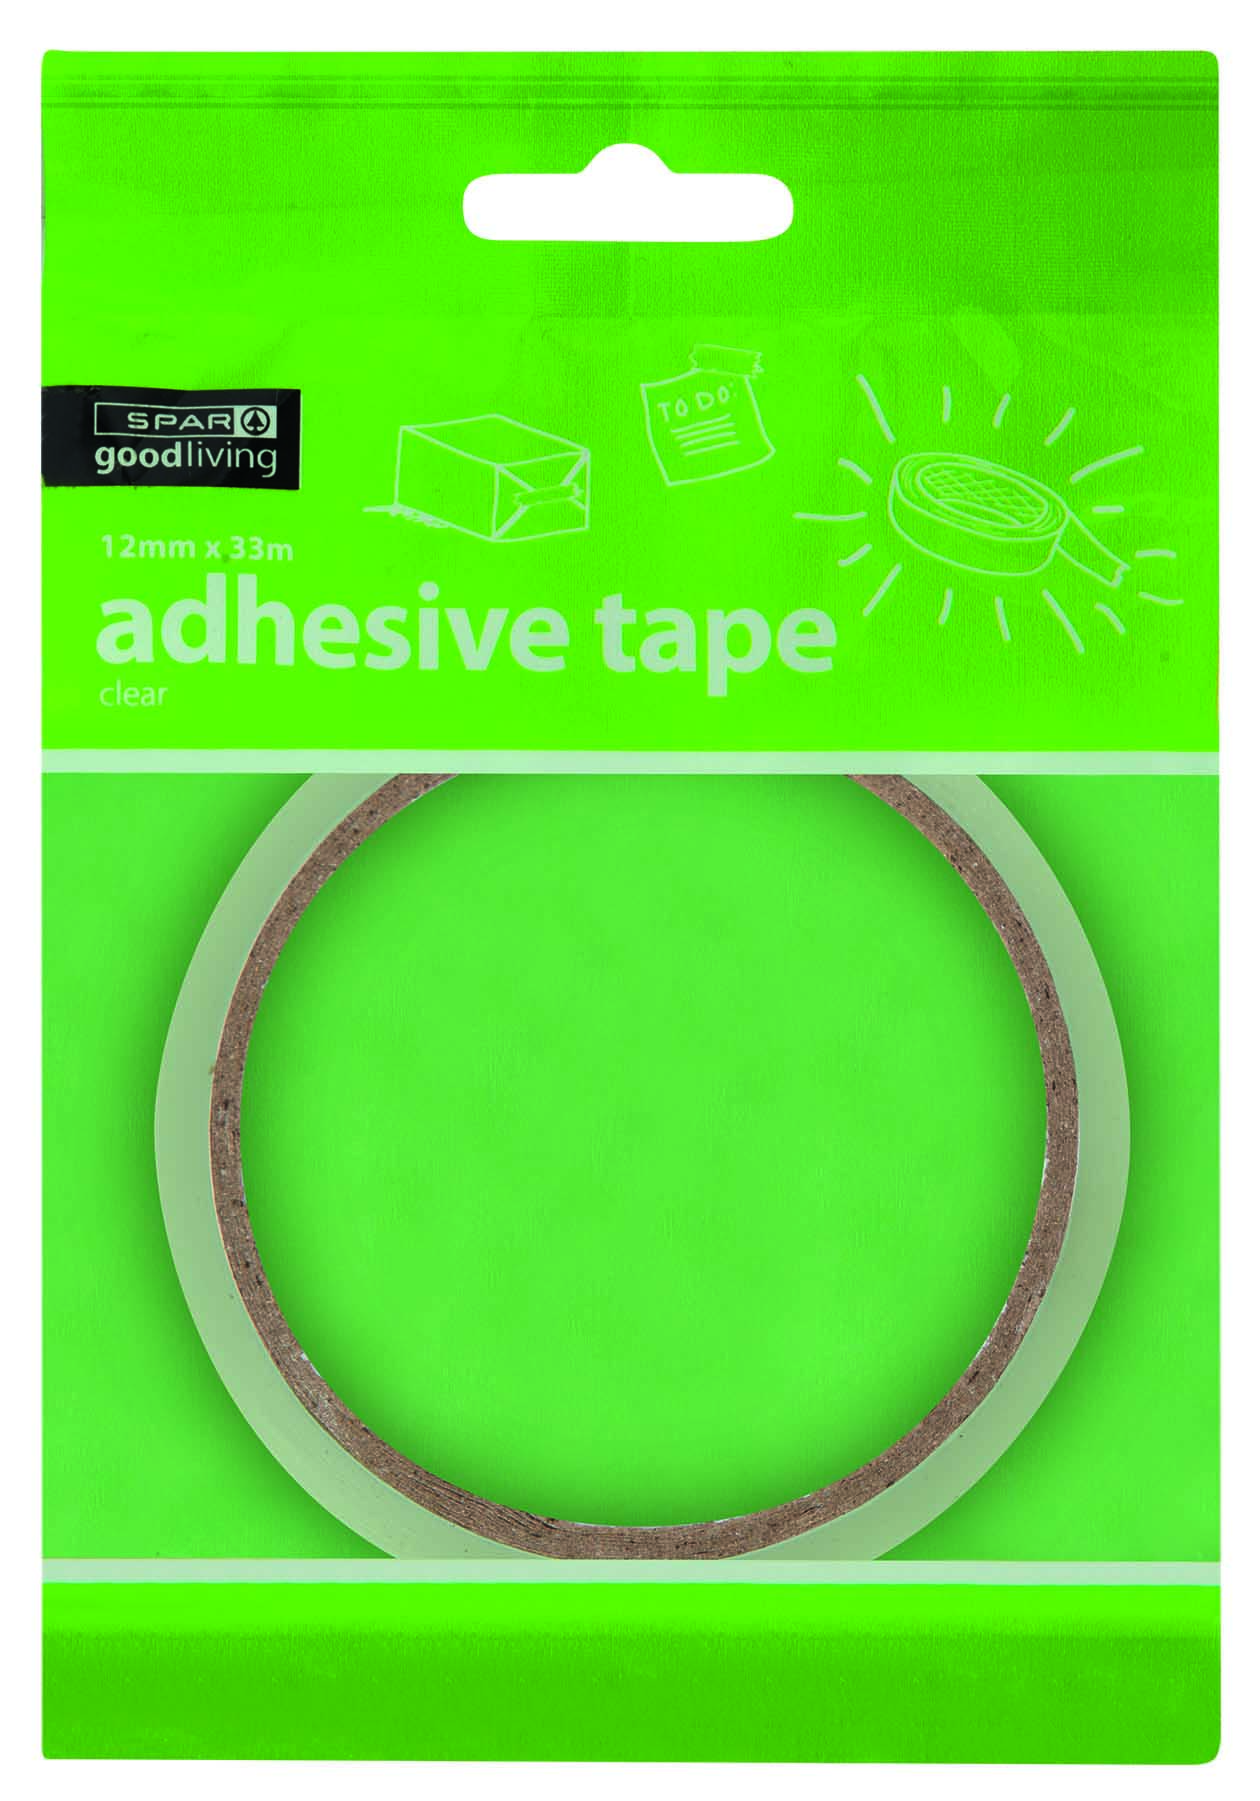 adhesive tape clear - 12mm x 33m 